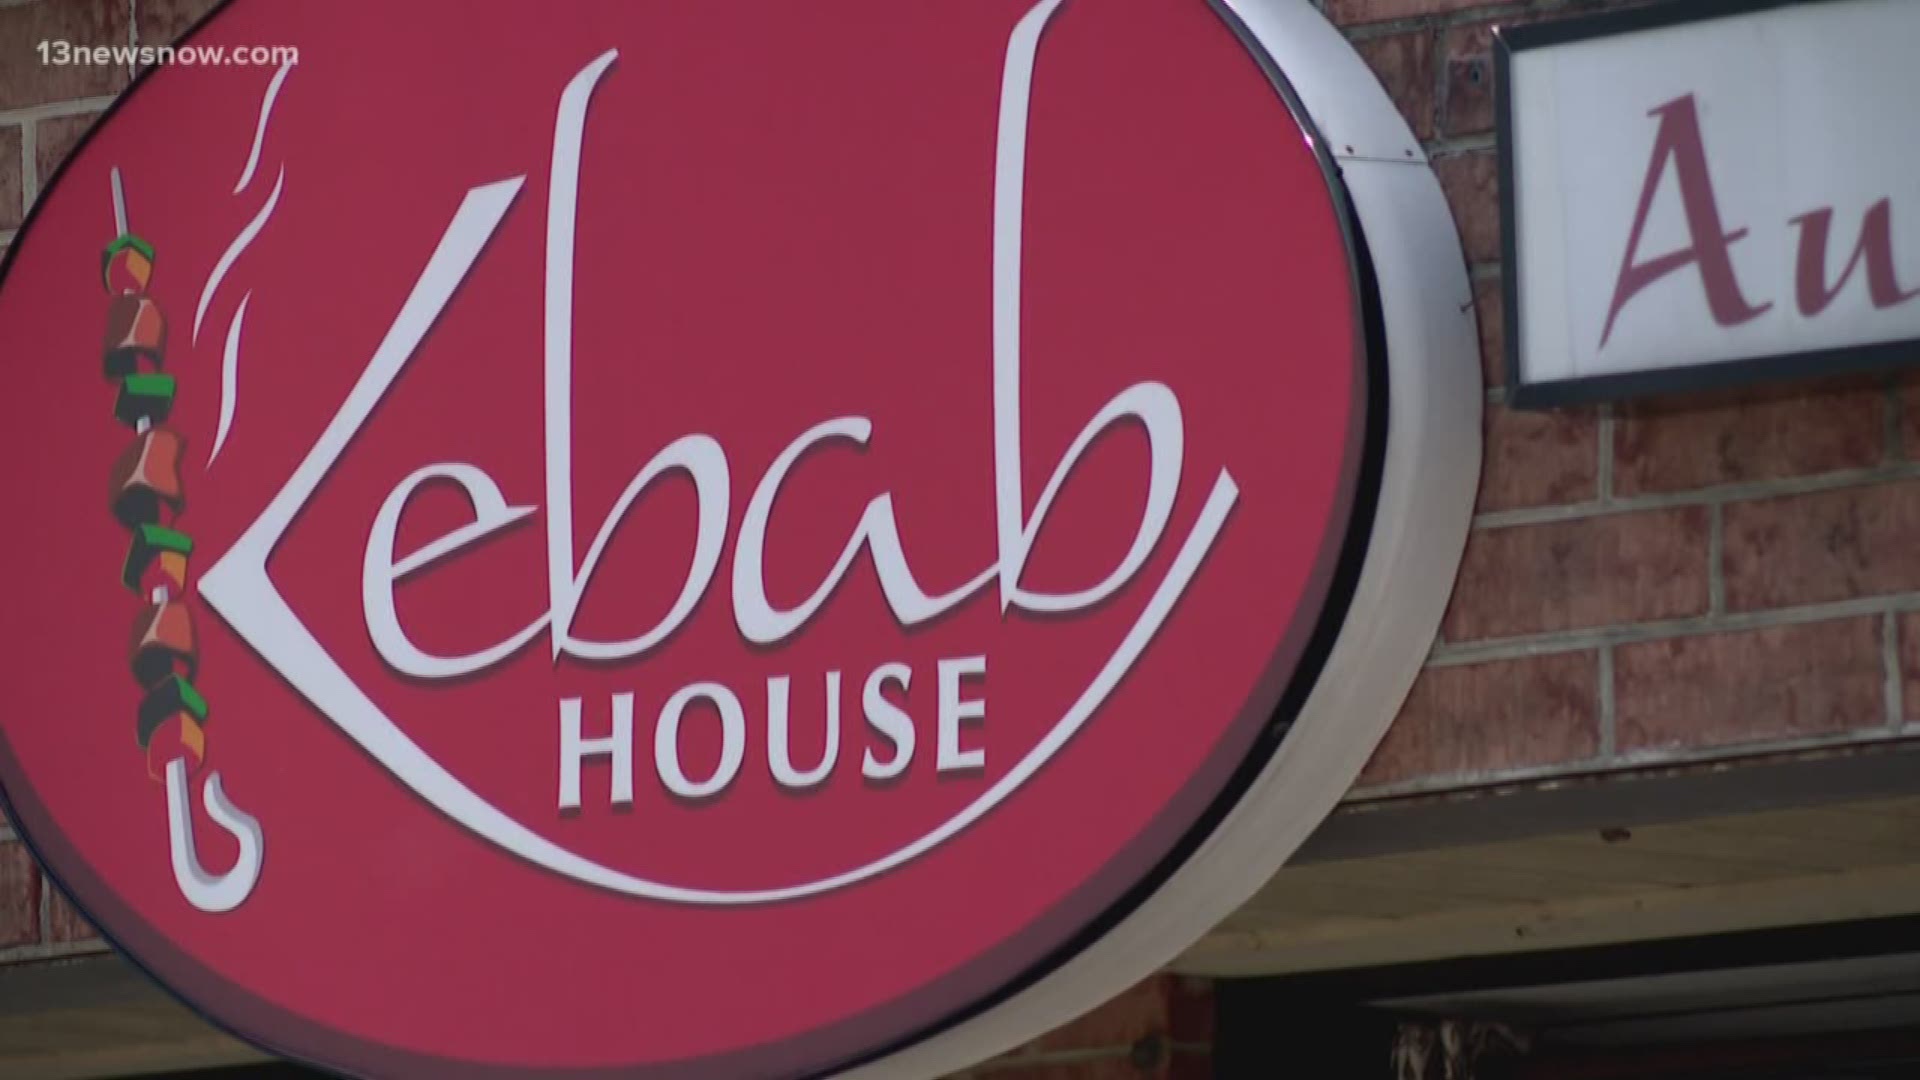 Health officials said a food handler at Kebab House at 980 J Clyde Morris Blvd and the Sunrise Pizzeria located at 10158 Jefferson Ave in Newport News recently was diagnosed with Hepatitis A. Hepatitis A is a virus that causes inflammation of the liver. It can be spread by direct contact with another person who has the infection, by consuming contaminated food or drink, or by touching surfaces that have been contaminated with the virus.